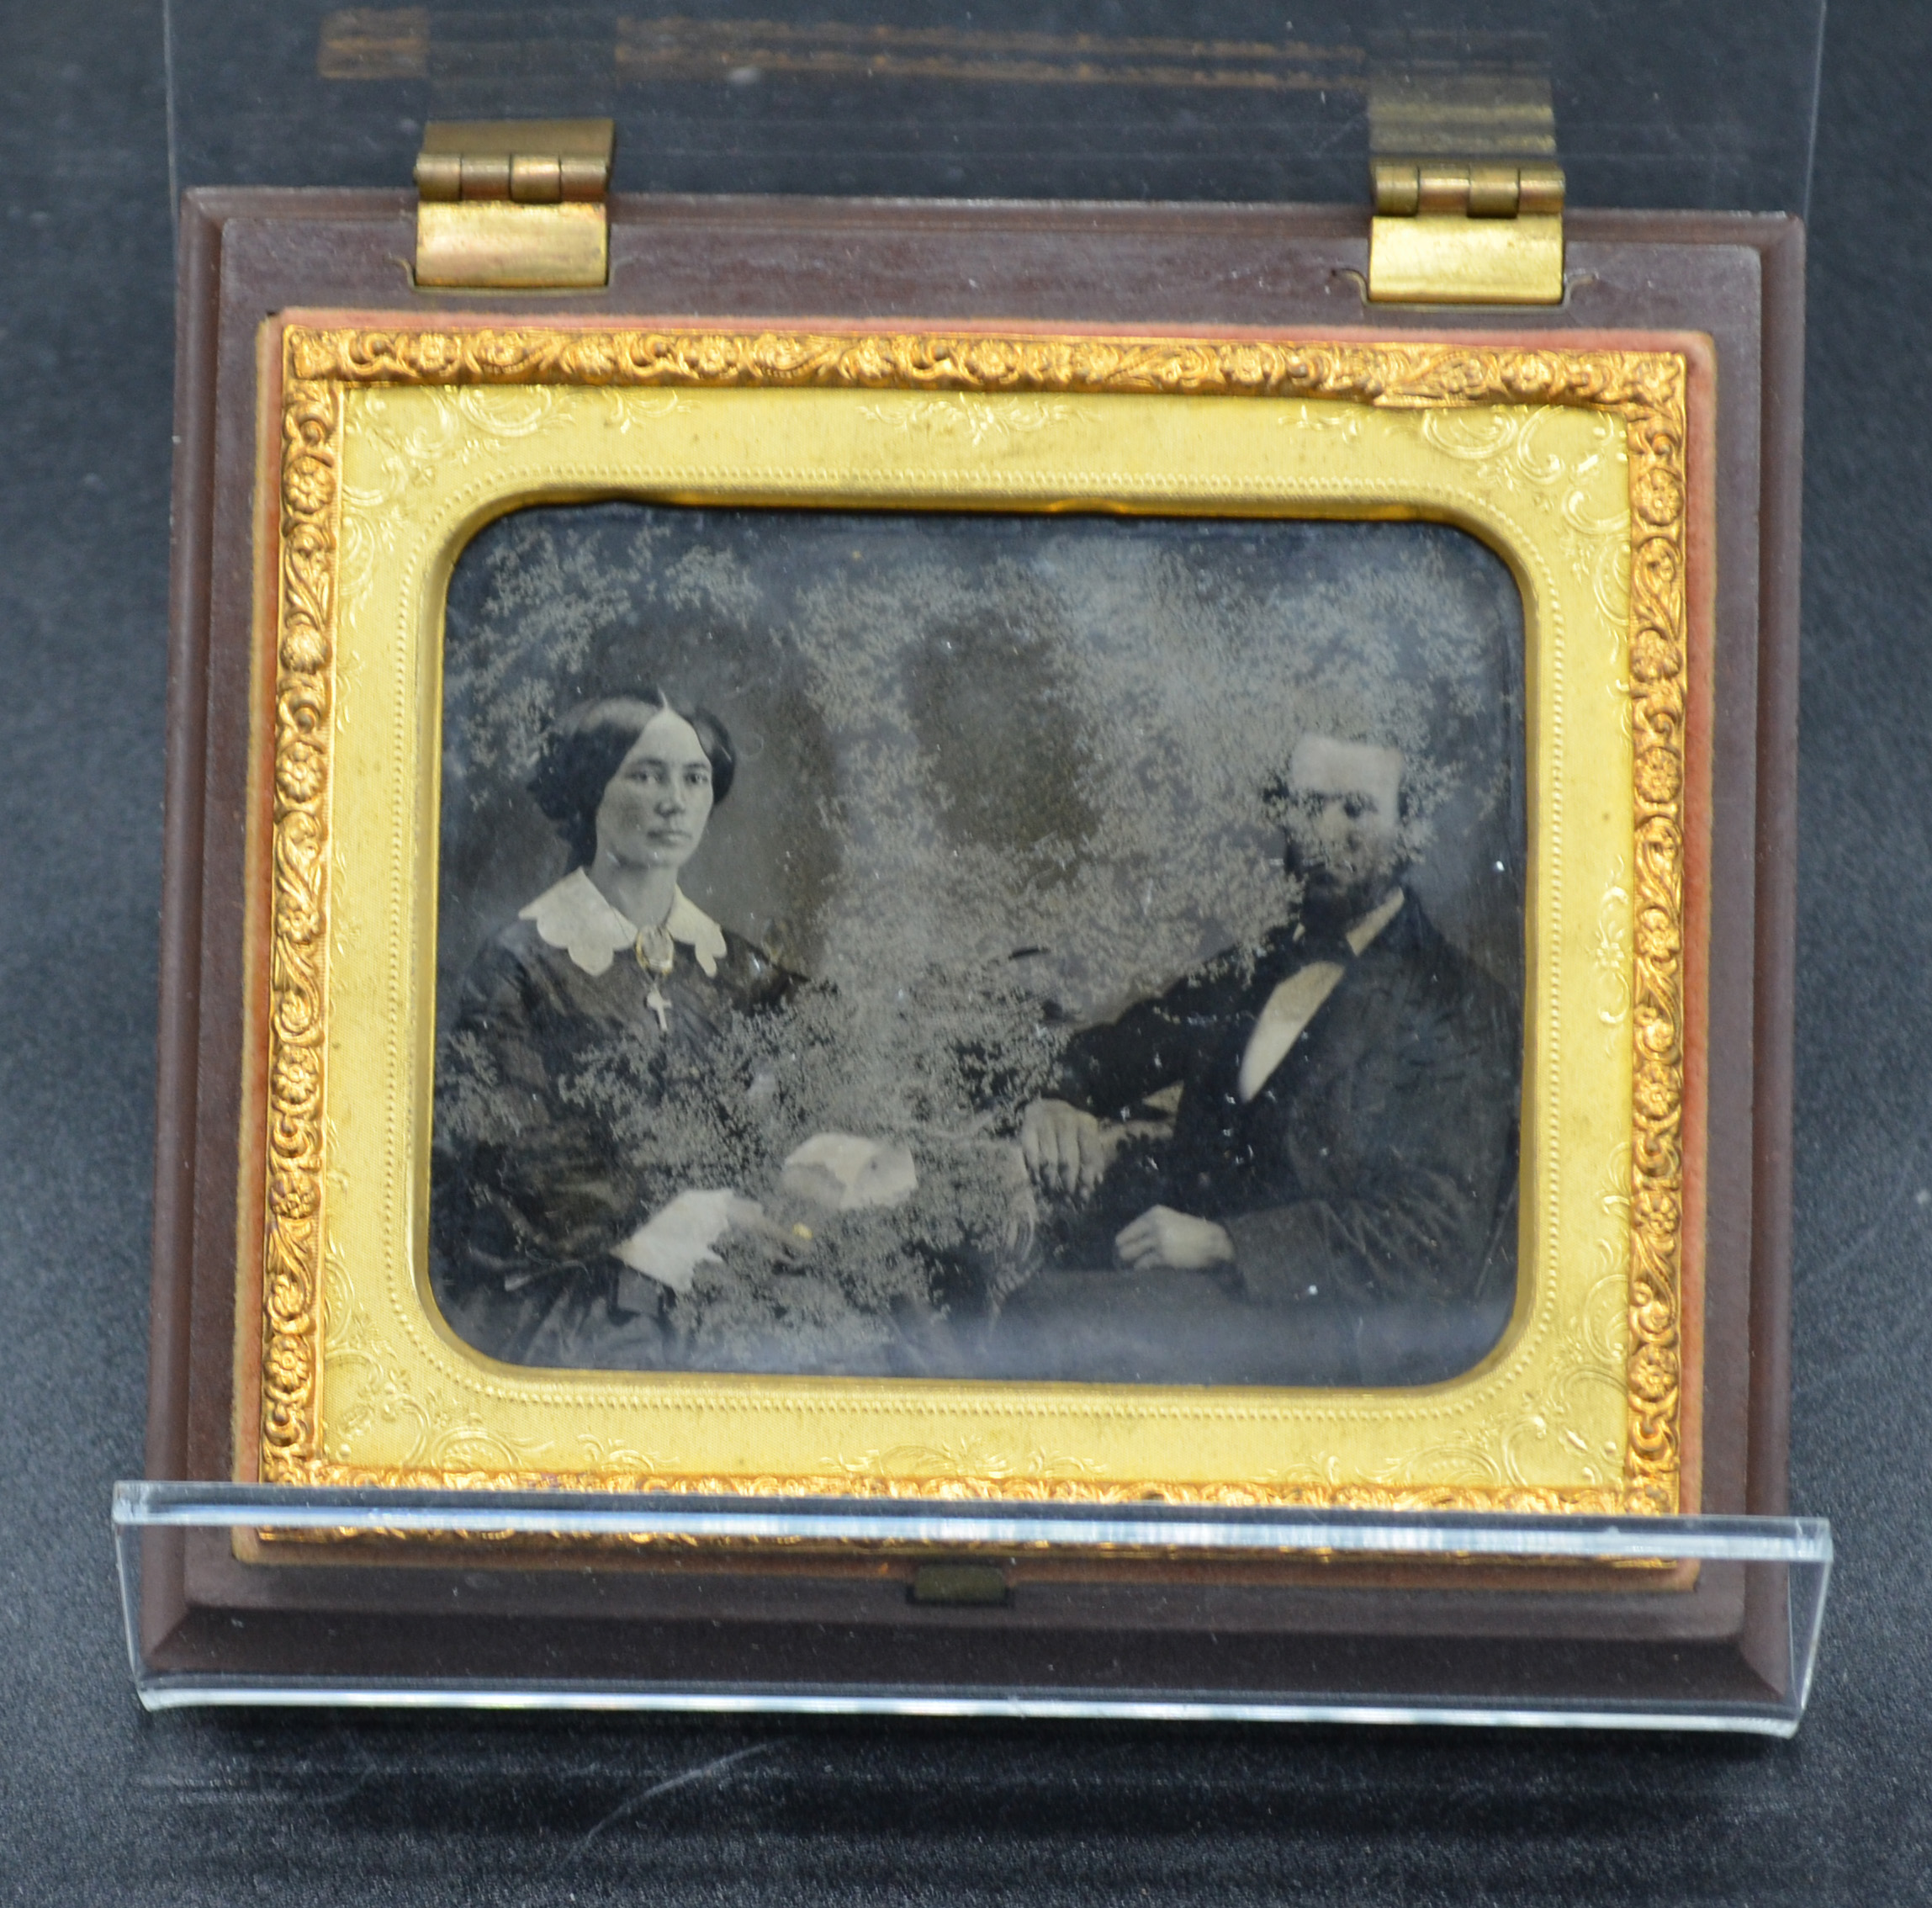 colour%20photo%20showing%20ambrotype%20photograph%20of%20unidentified%20female%20and%20male